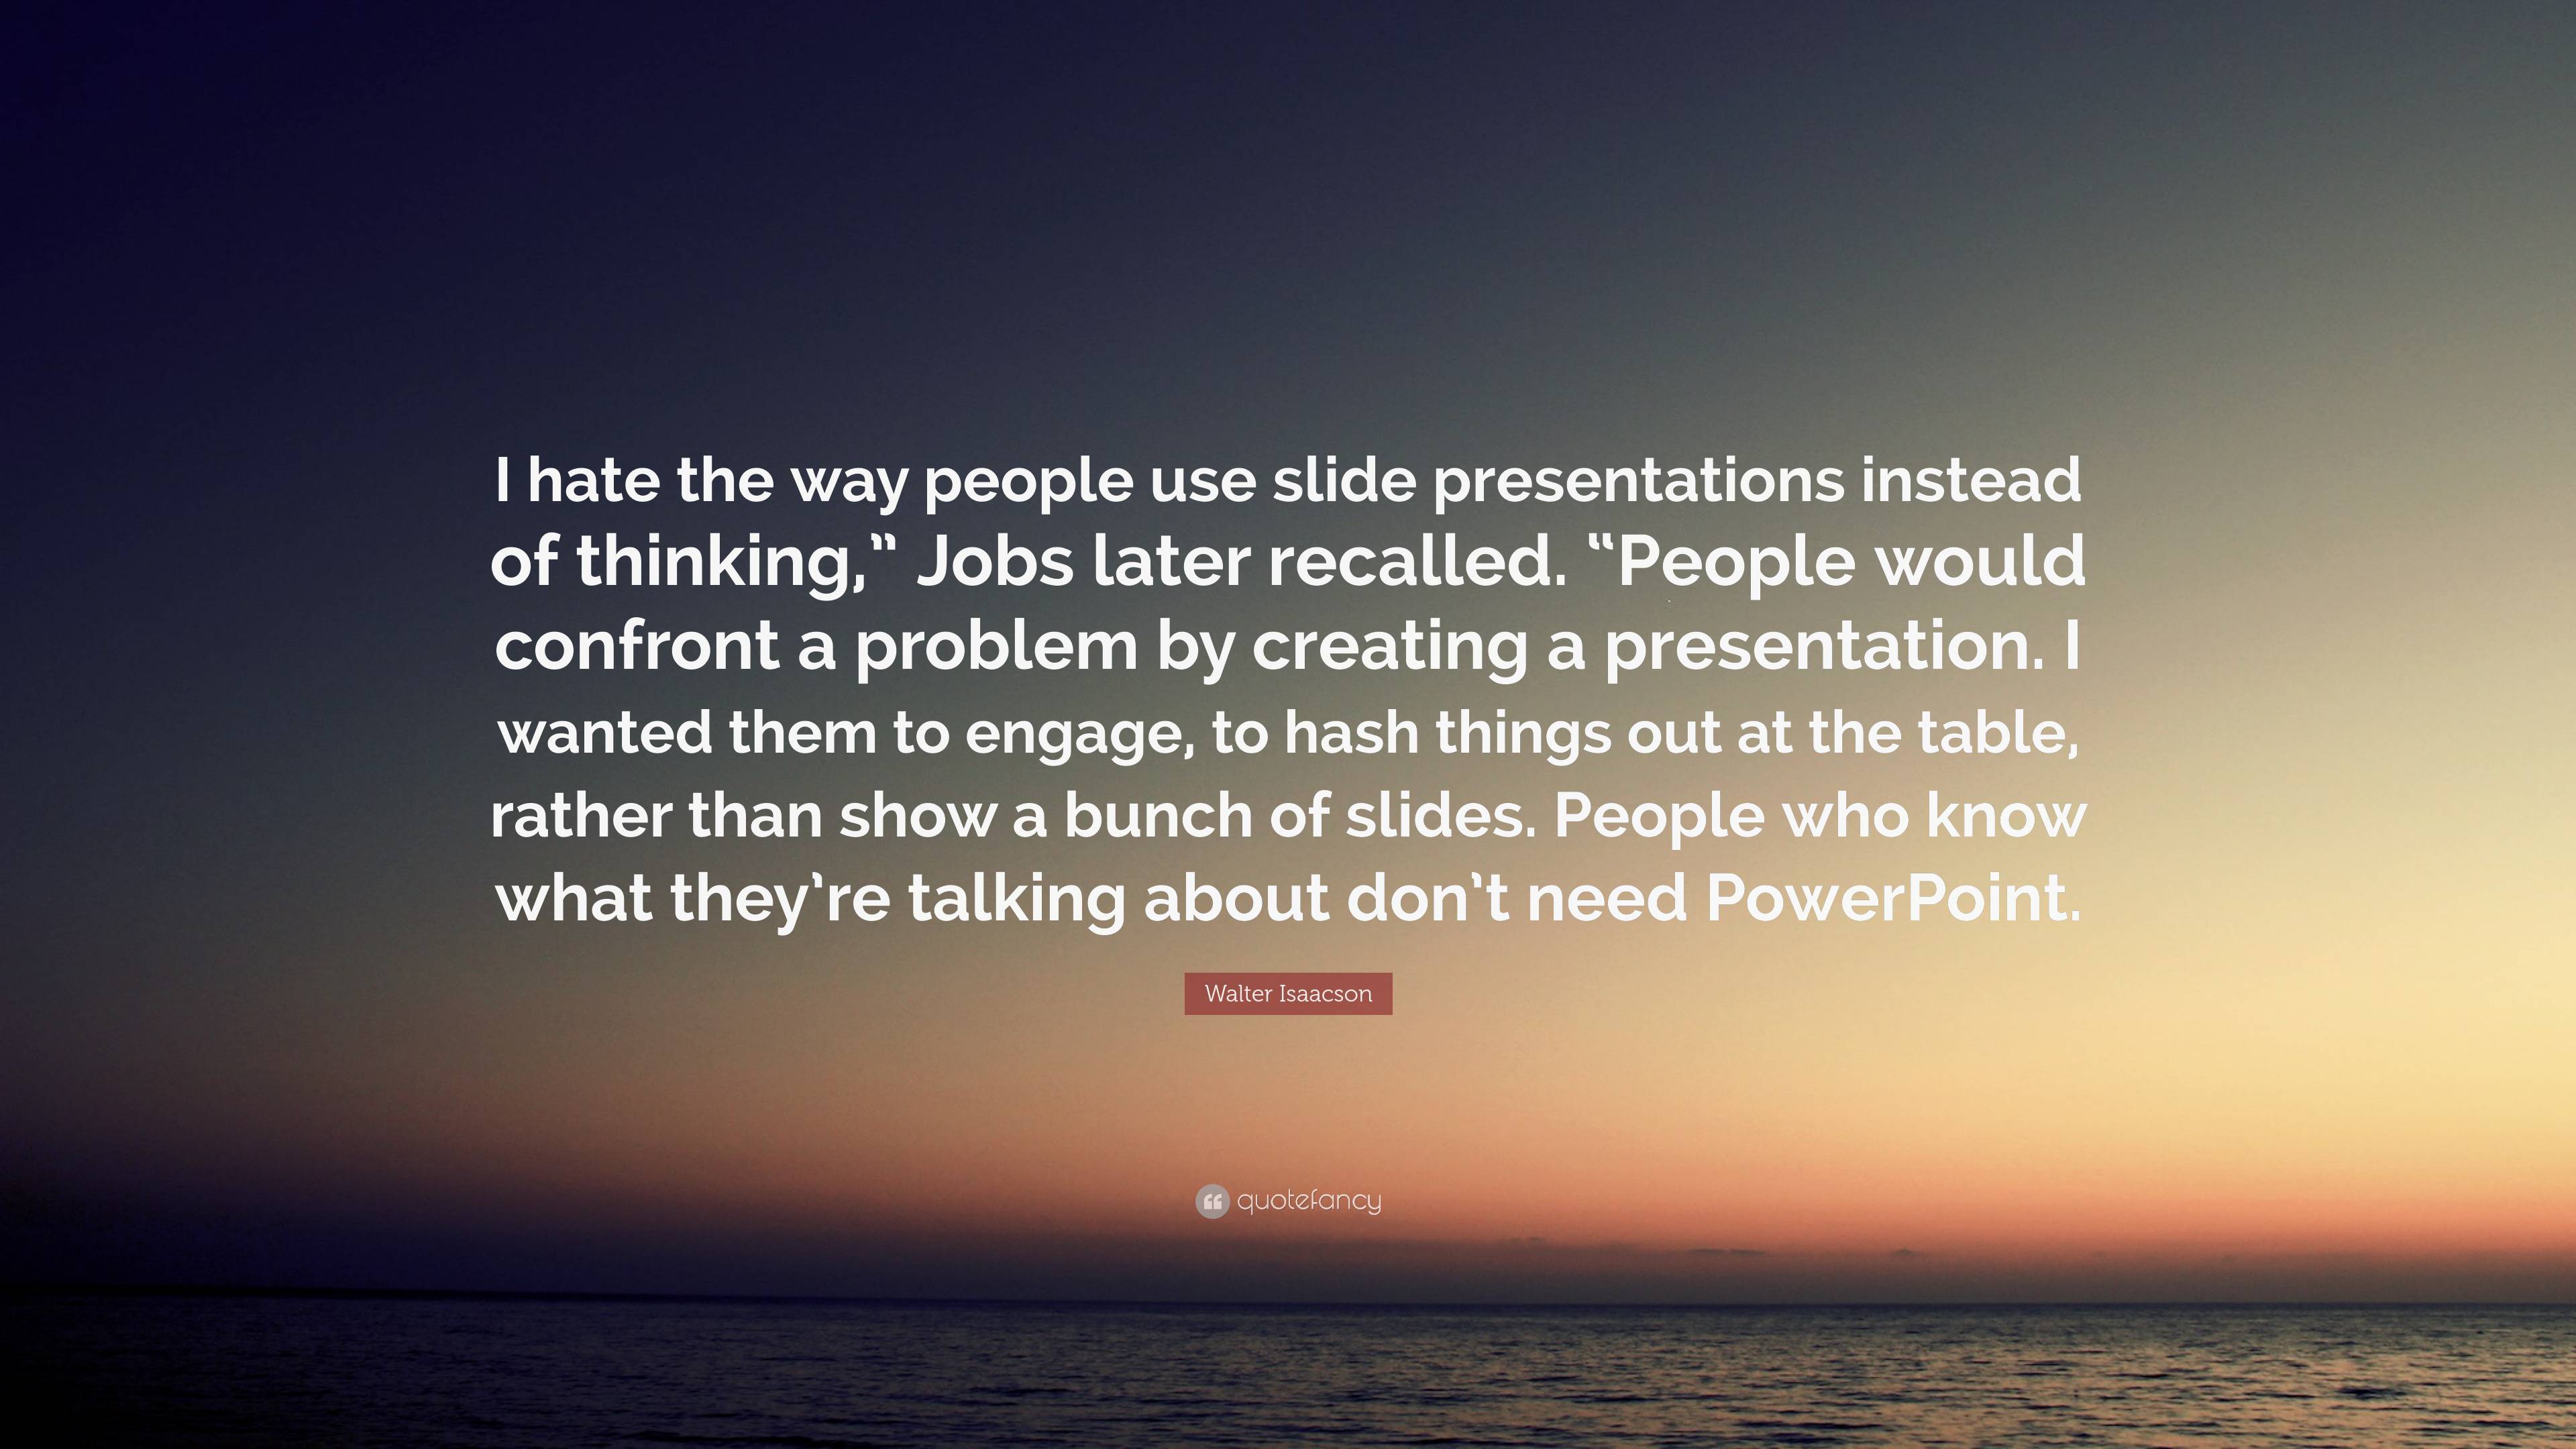 Walter Isaacson Quote: “I hate the way people use slide presentations ...